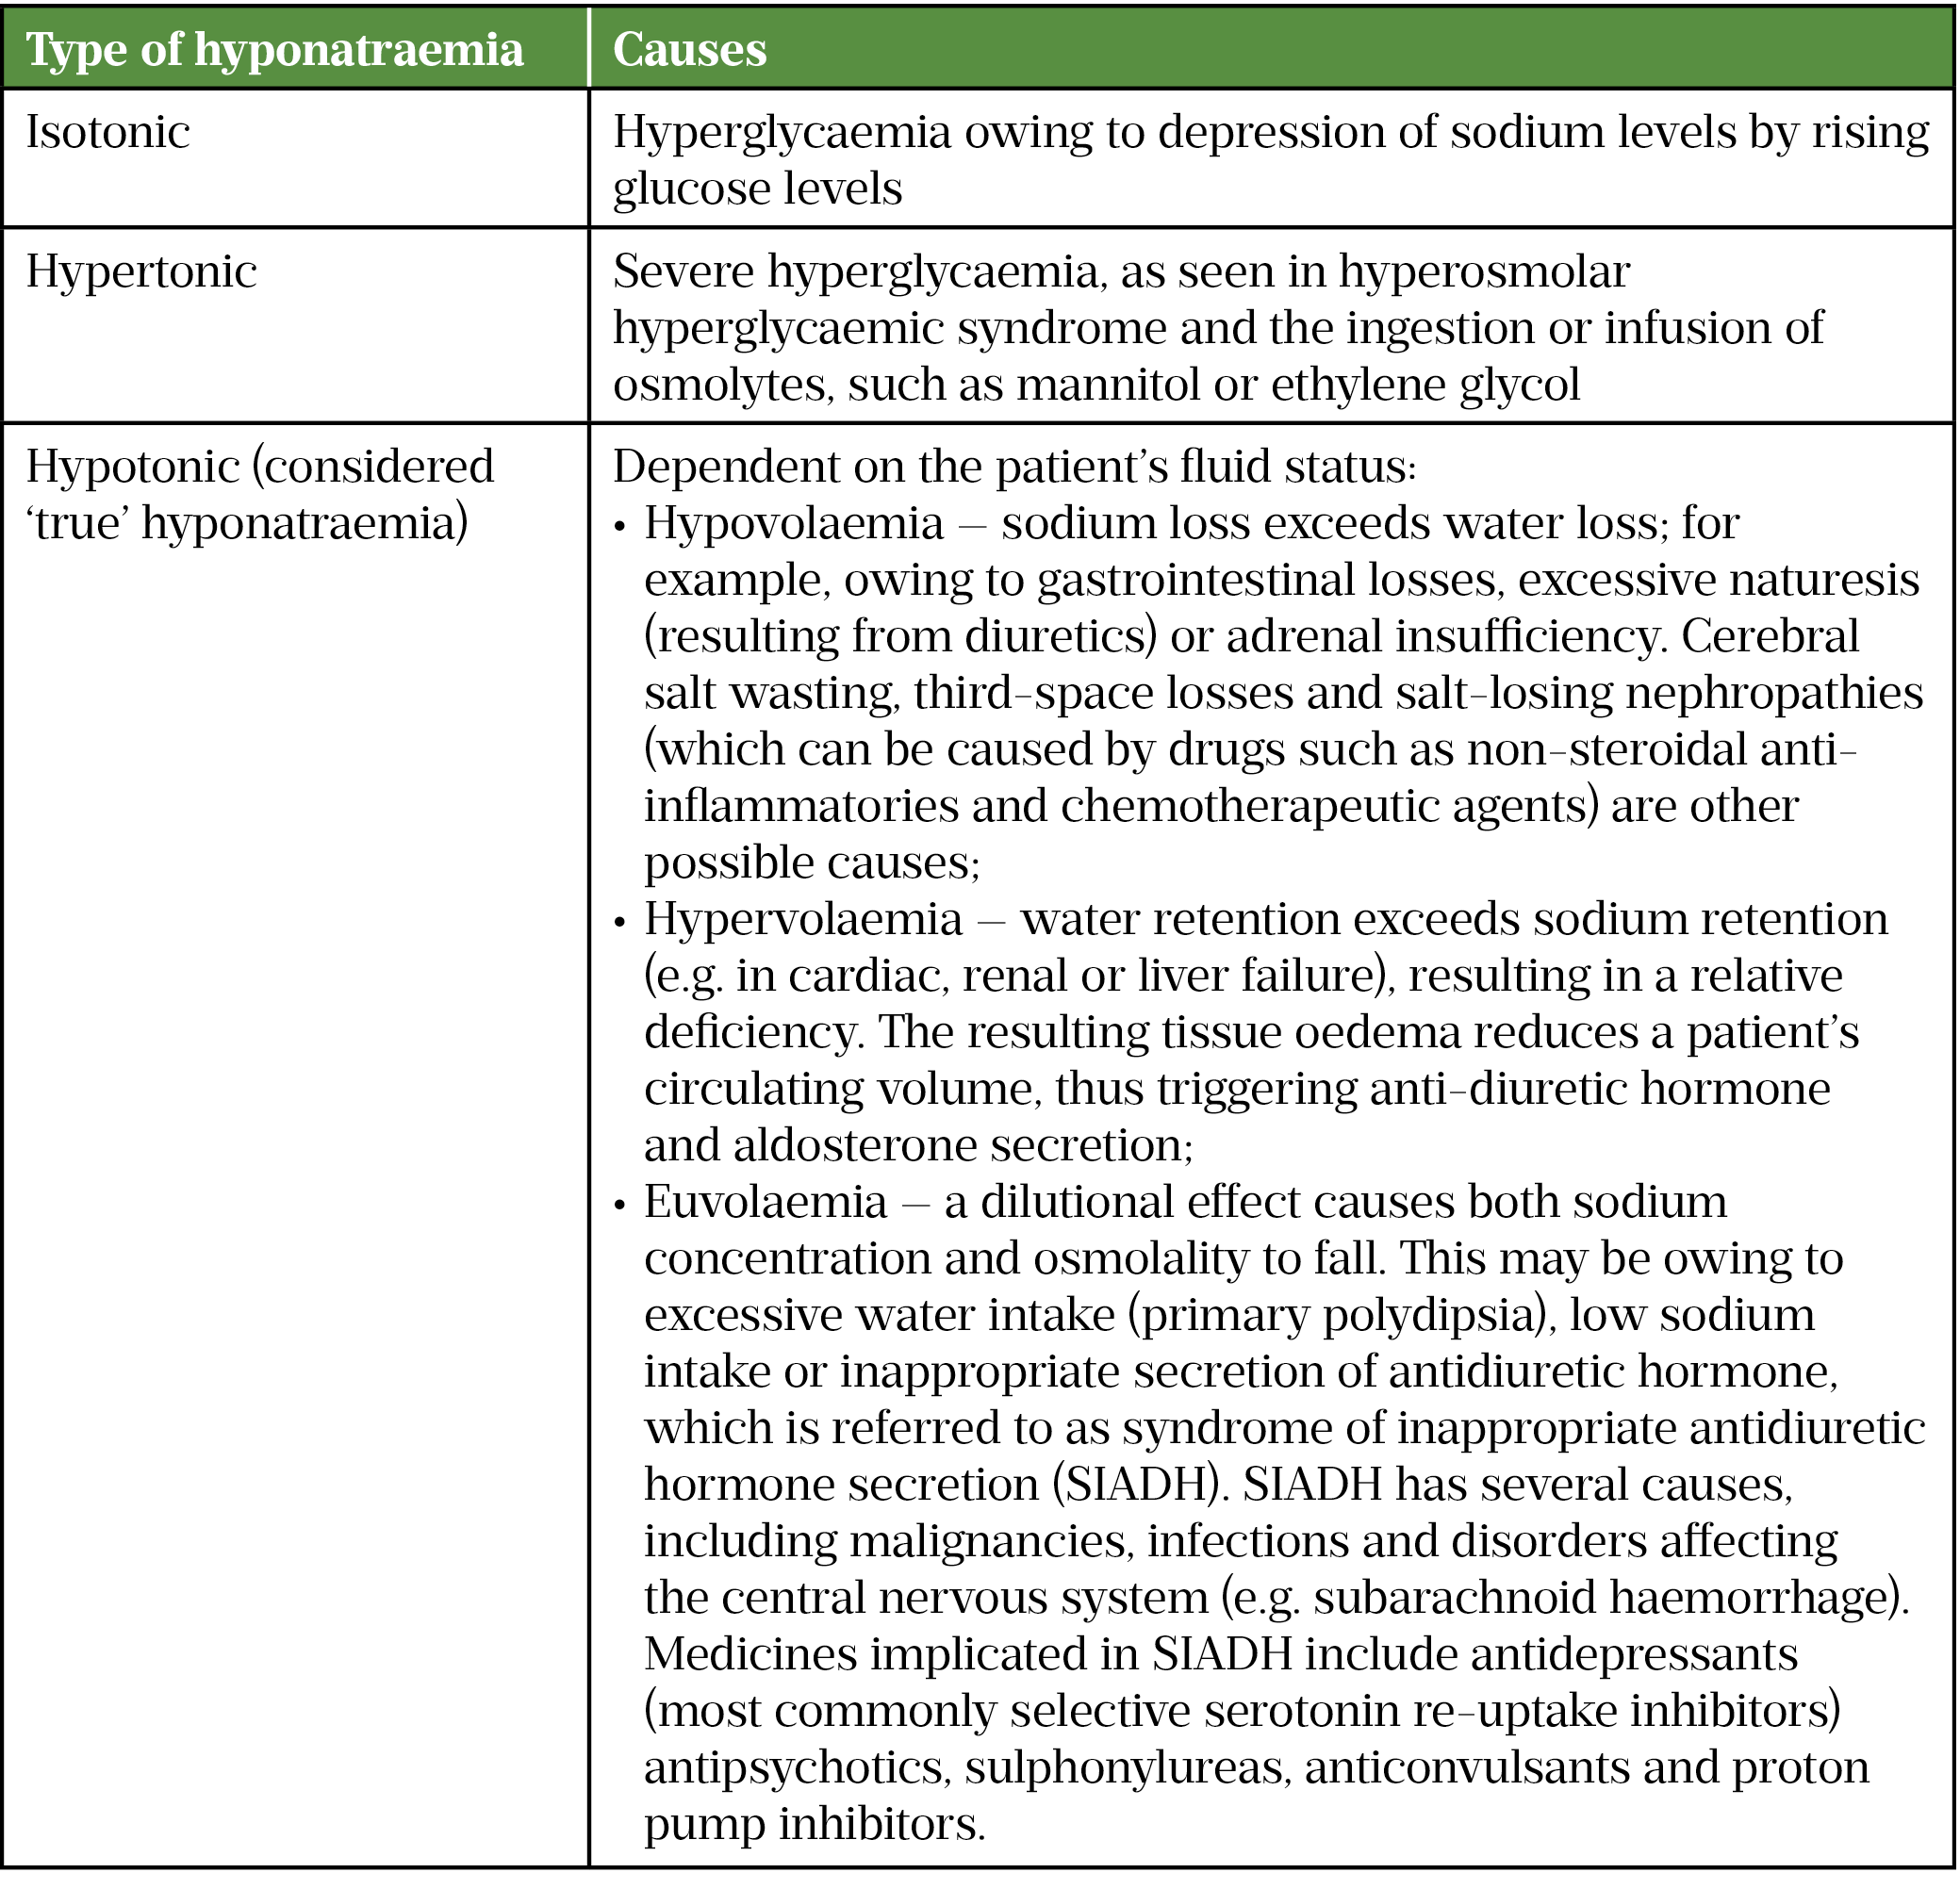 Table 2: Subtypes of hyponatraemia and their causes